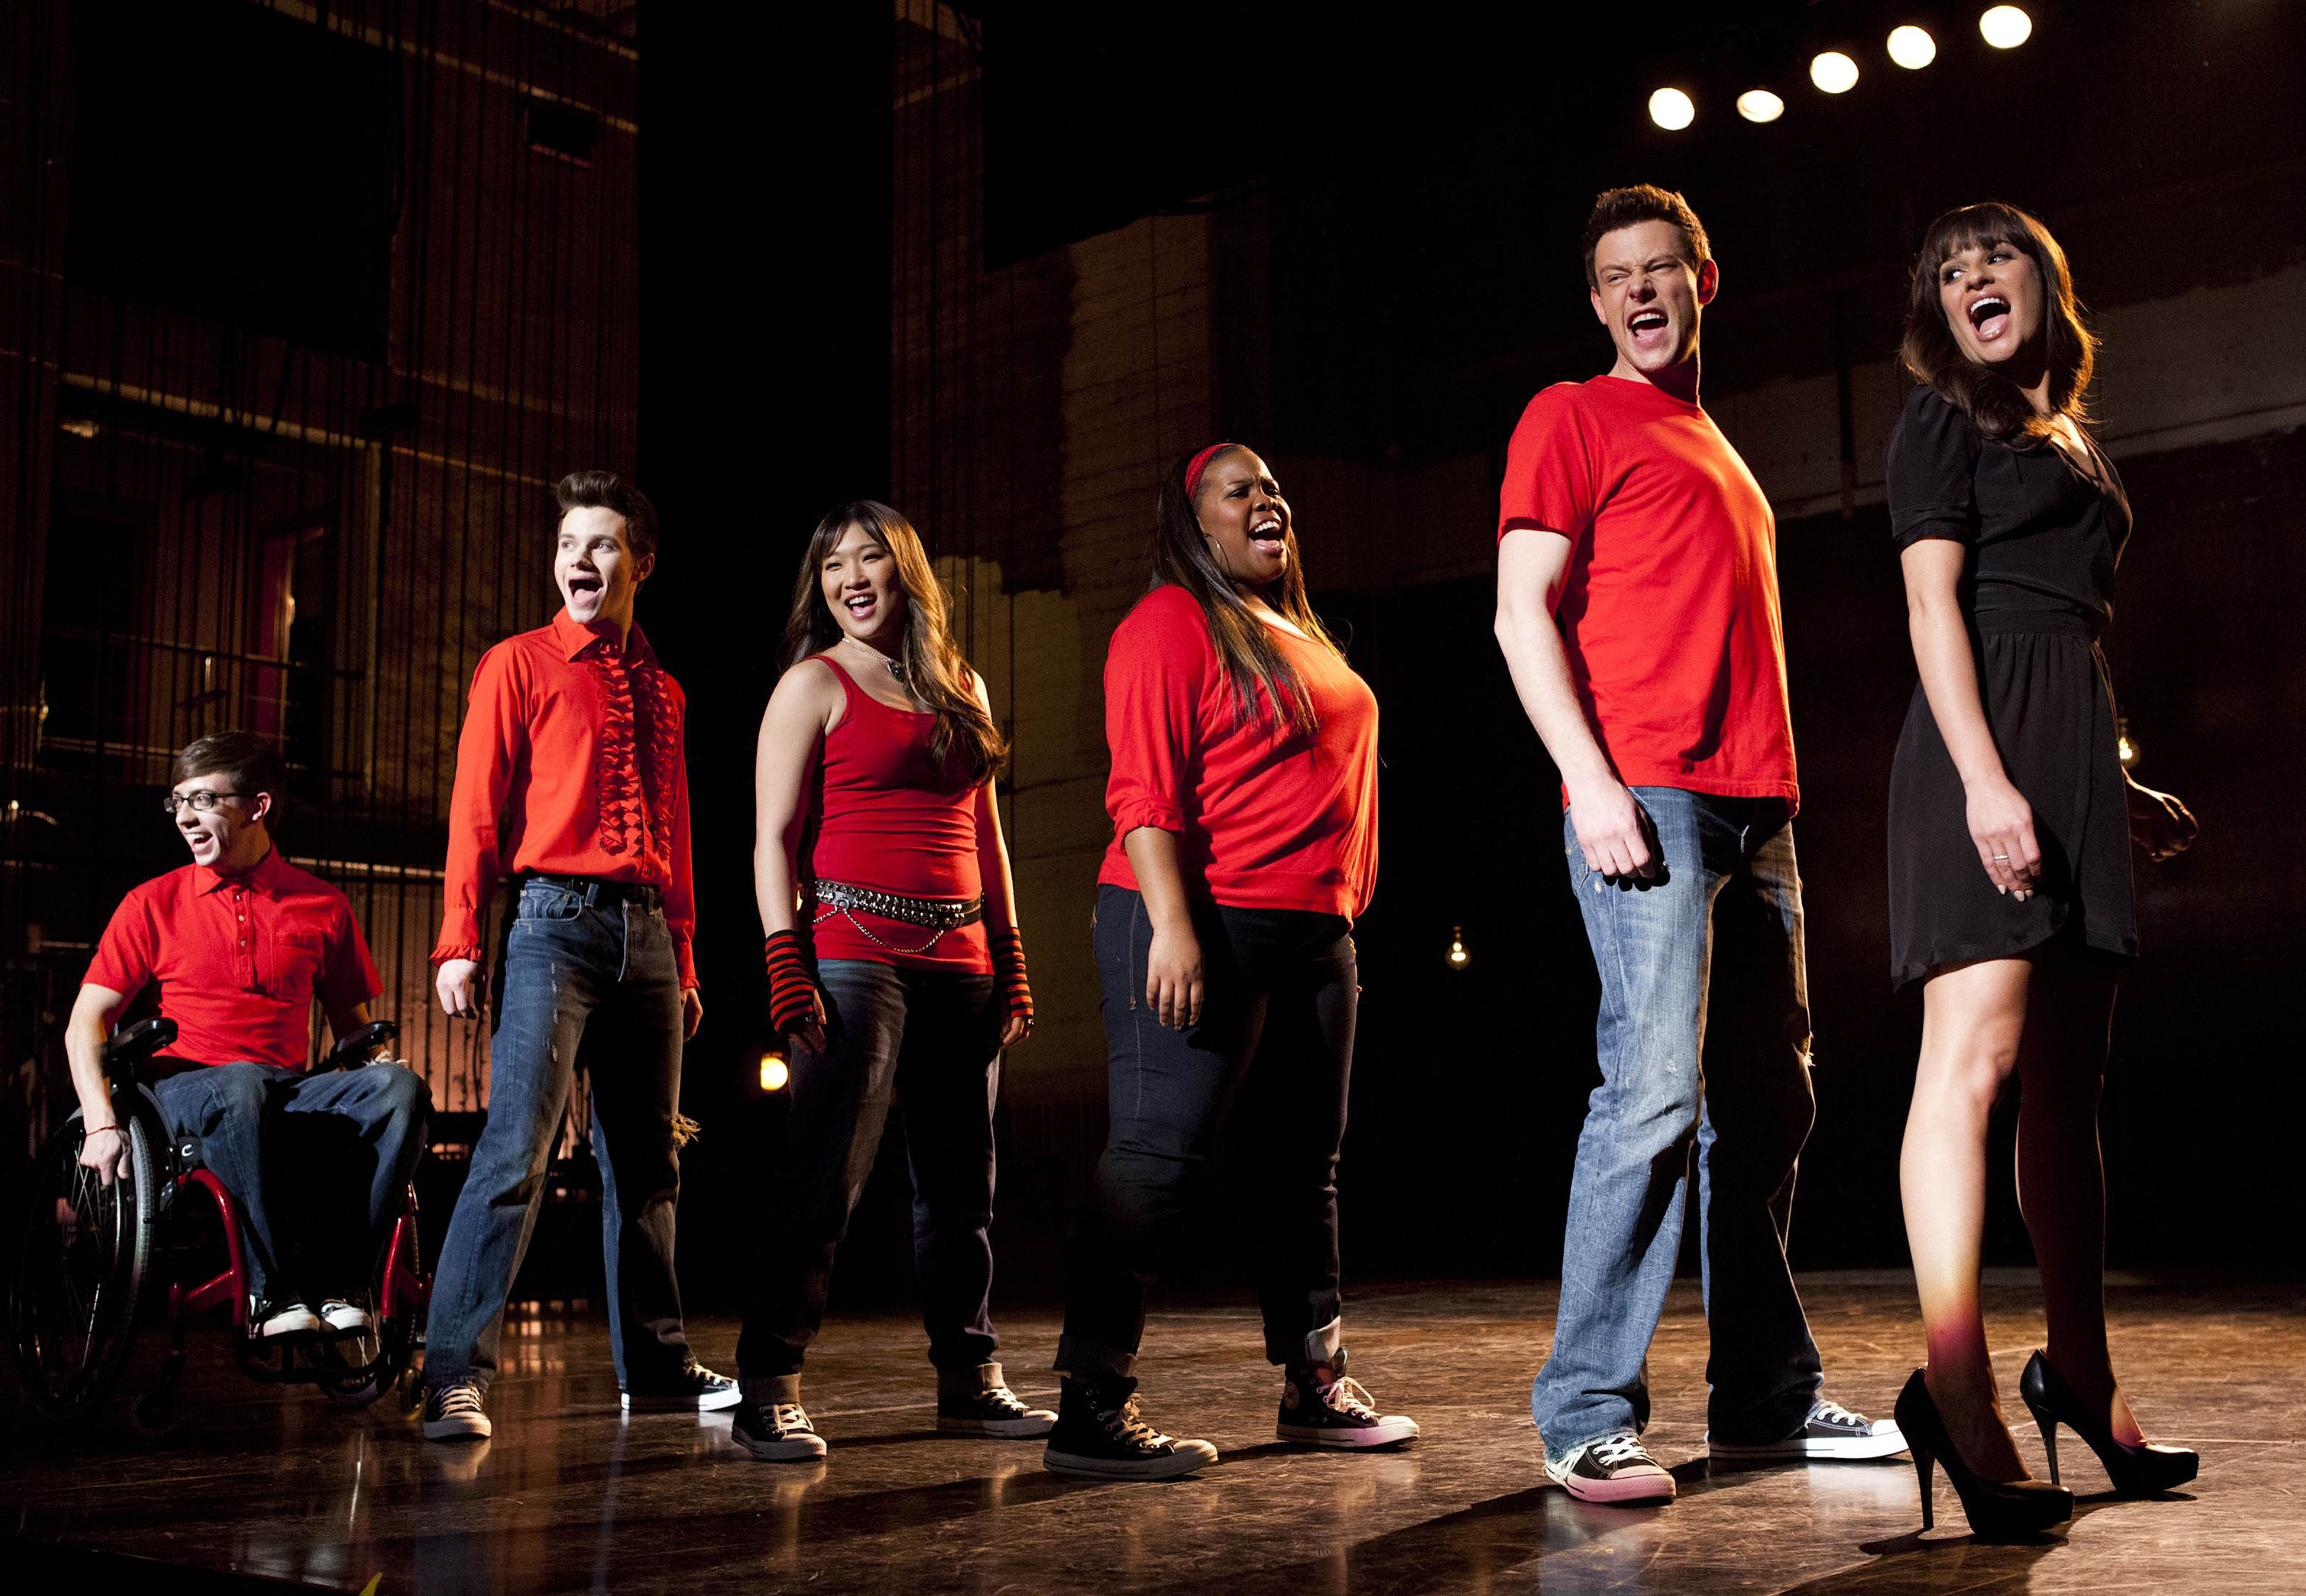 Kevin McHale, Chris Colfer, Jenna Ushkowitz, Amber Riley, Cory Monteith, and Lea Michele, in character as Artie, Kurt, Tina, Mercedes, Finn, and Rachel, share a scene in 'Glee' Season 4, which is now on Hulu and Disney+. The characters in the photo stand in a line onstage and sing.